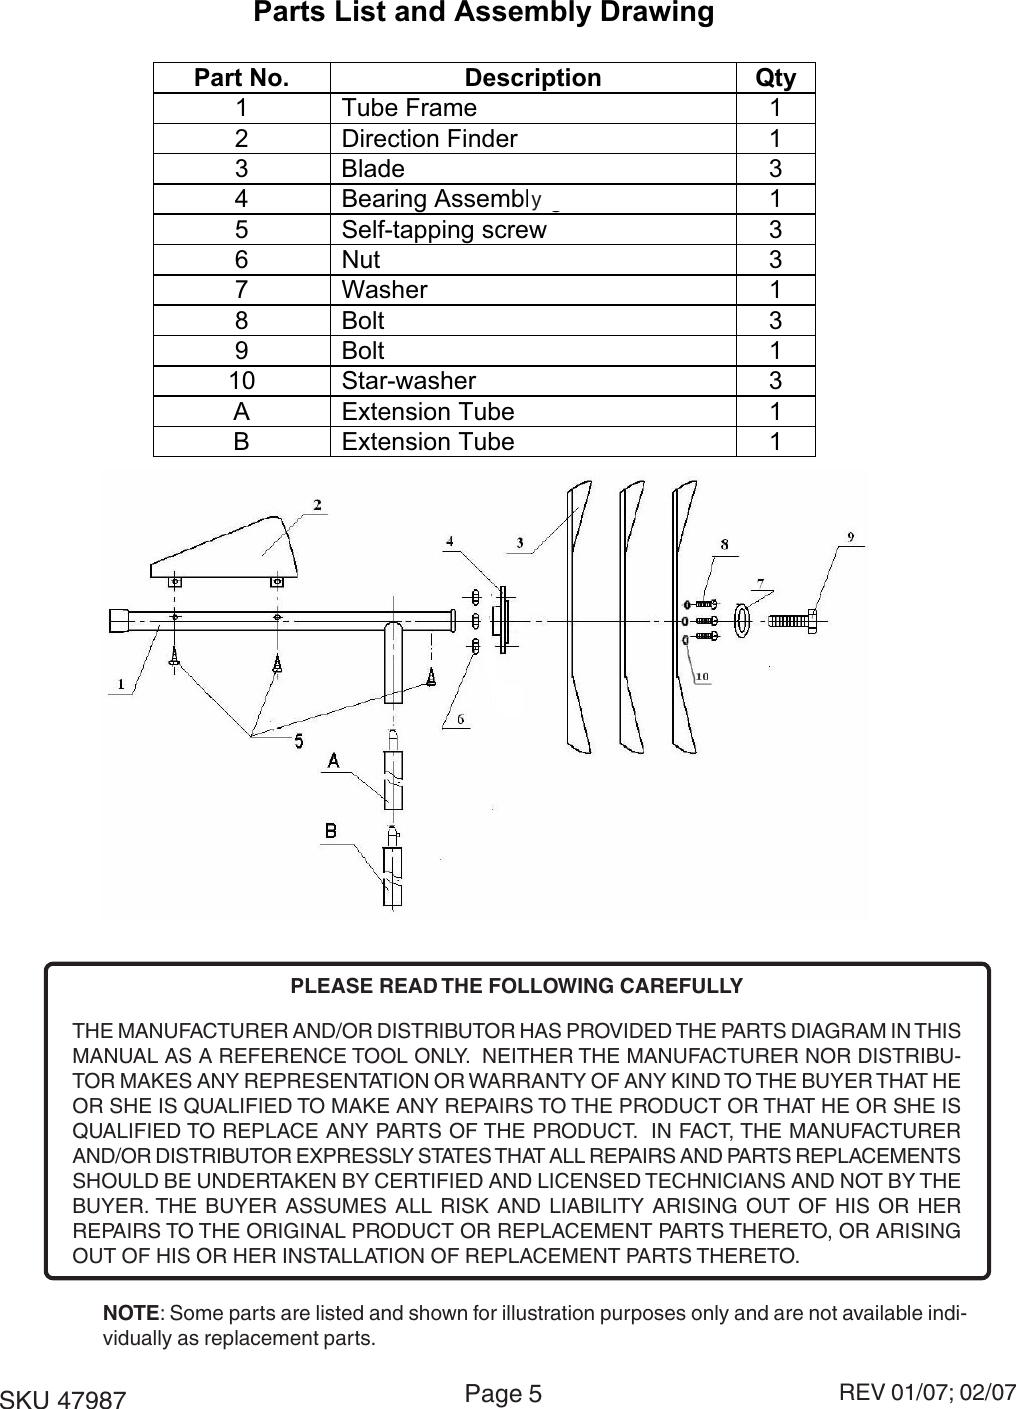 Page 5 of 5 - Harbor-Freight Harbor-Freight-Windmill-Mole-Chaser-Product-Manual- 47987 Manual  Harbor-freight-windmill-mole-chaser-product-manual